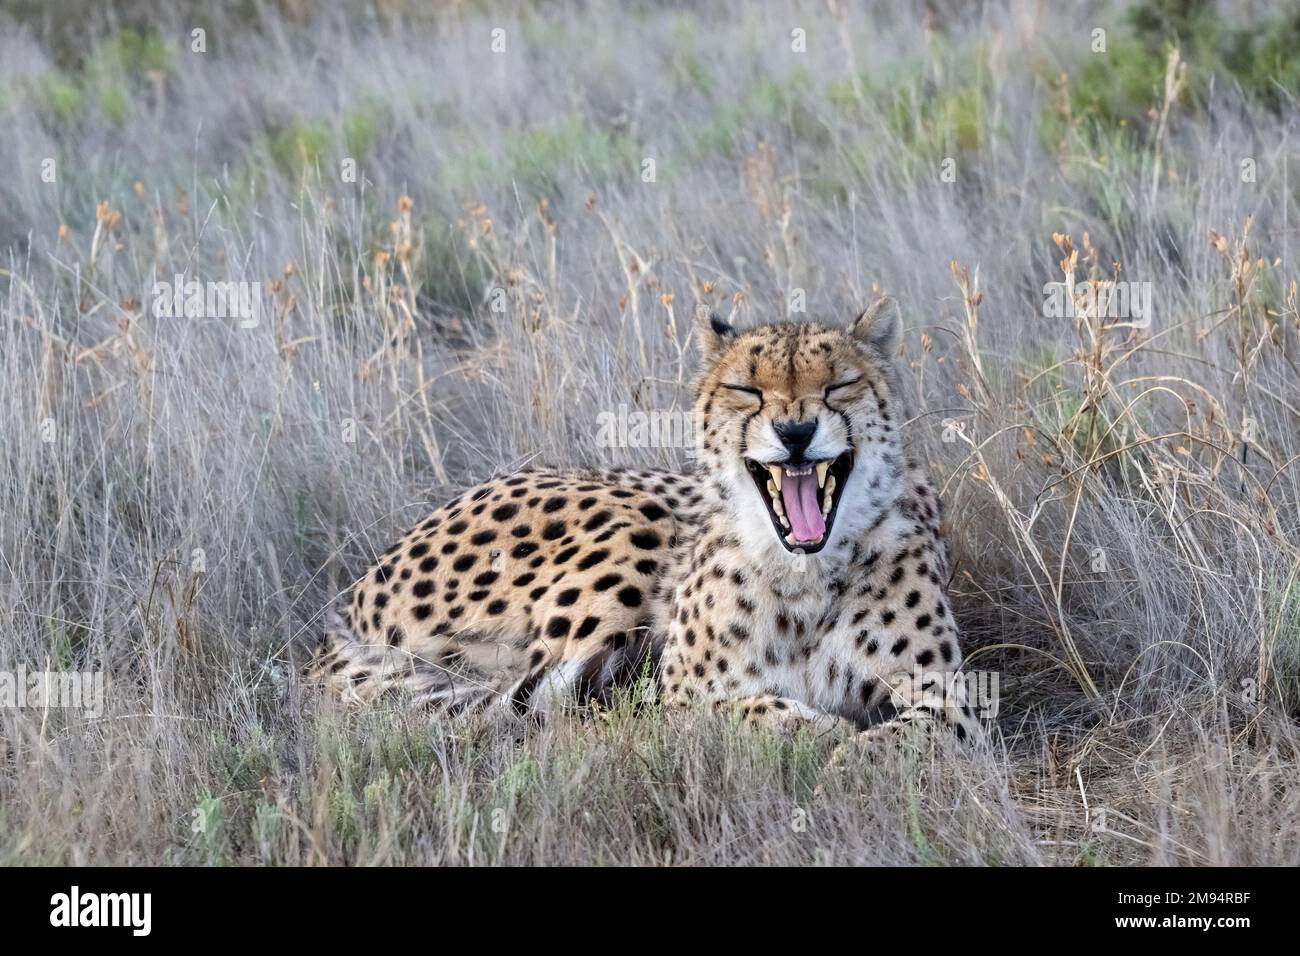 Cheetah Yawning Widely, Appearing to Laugh Stock Photo